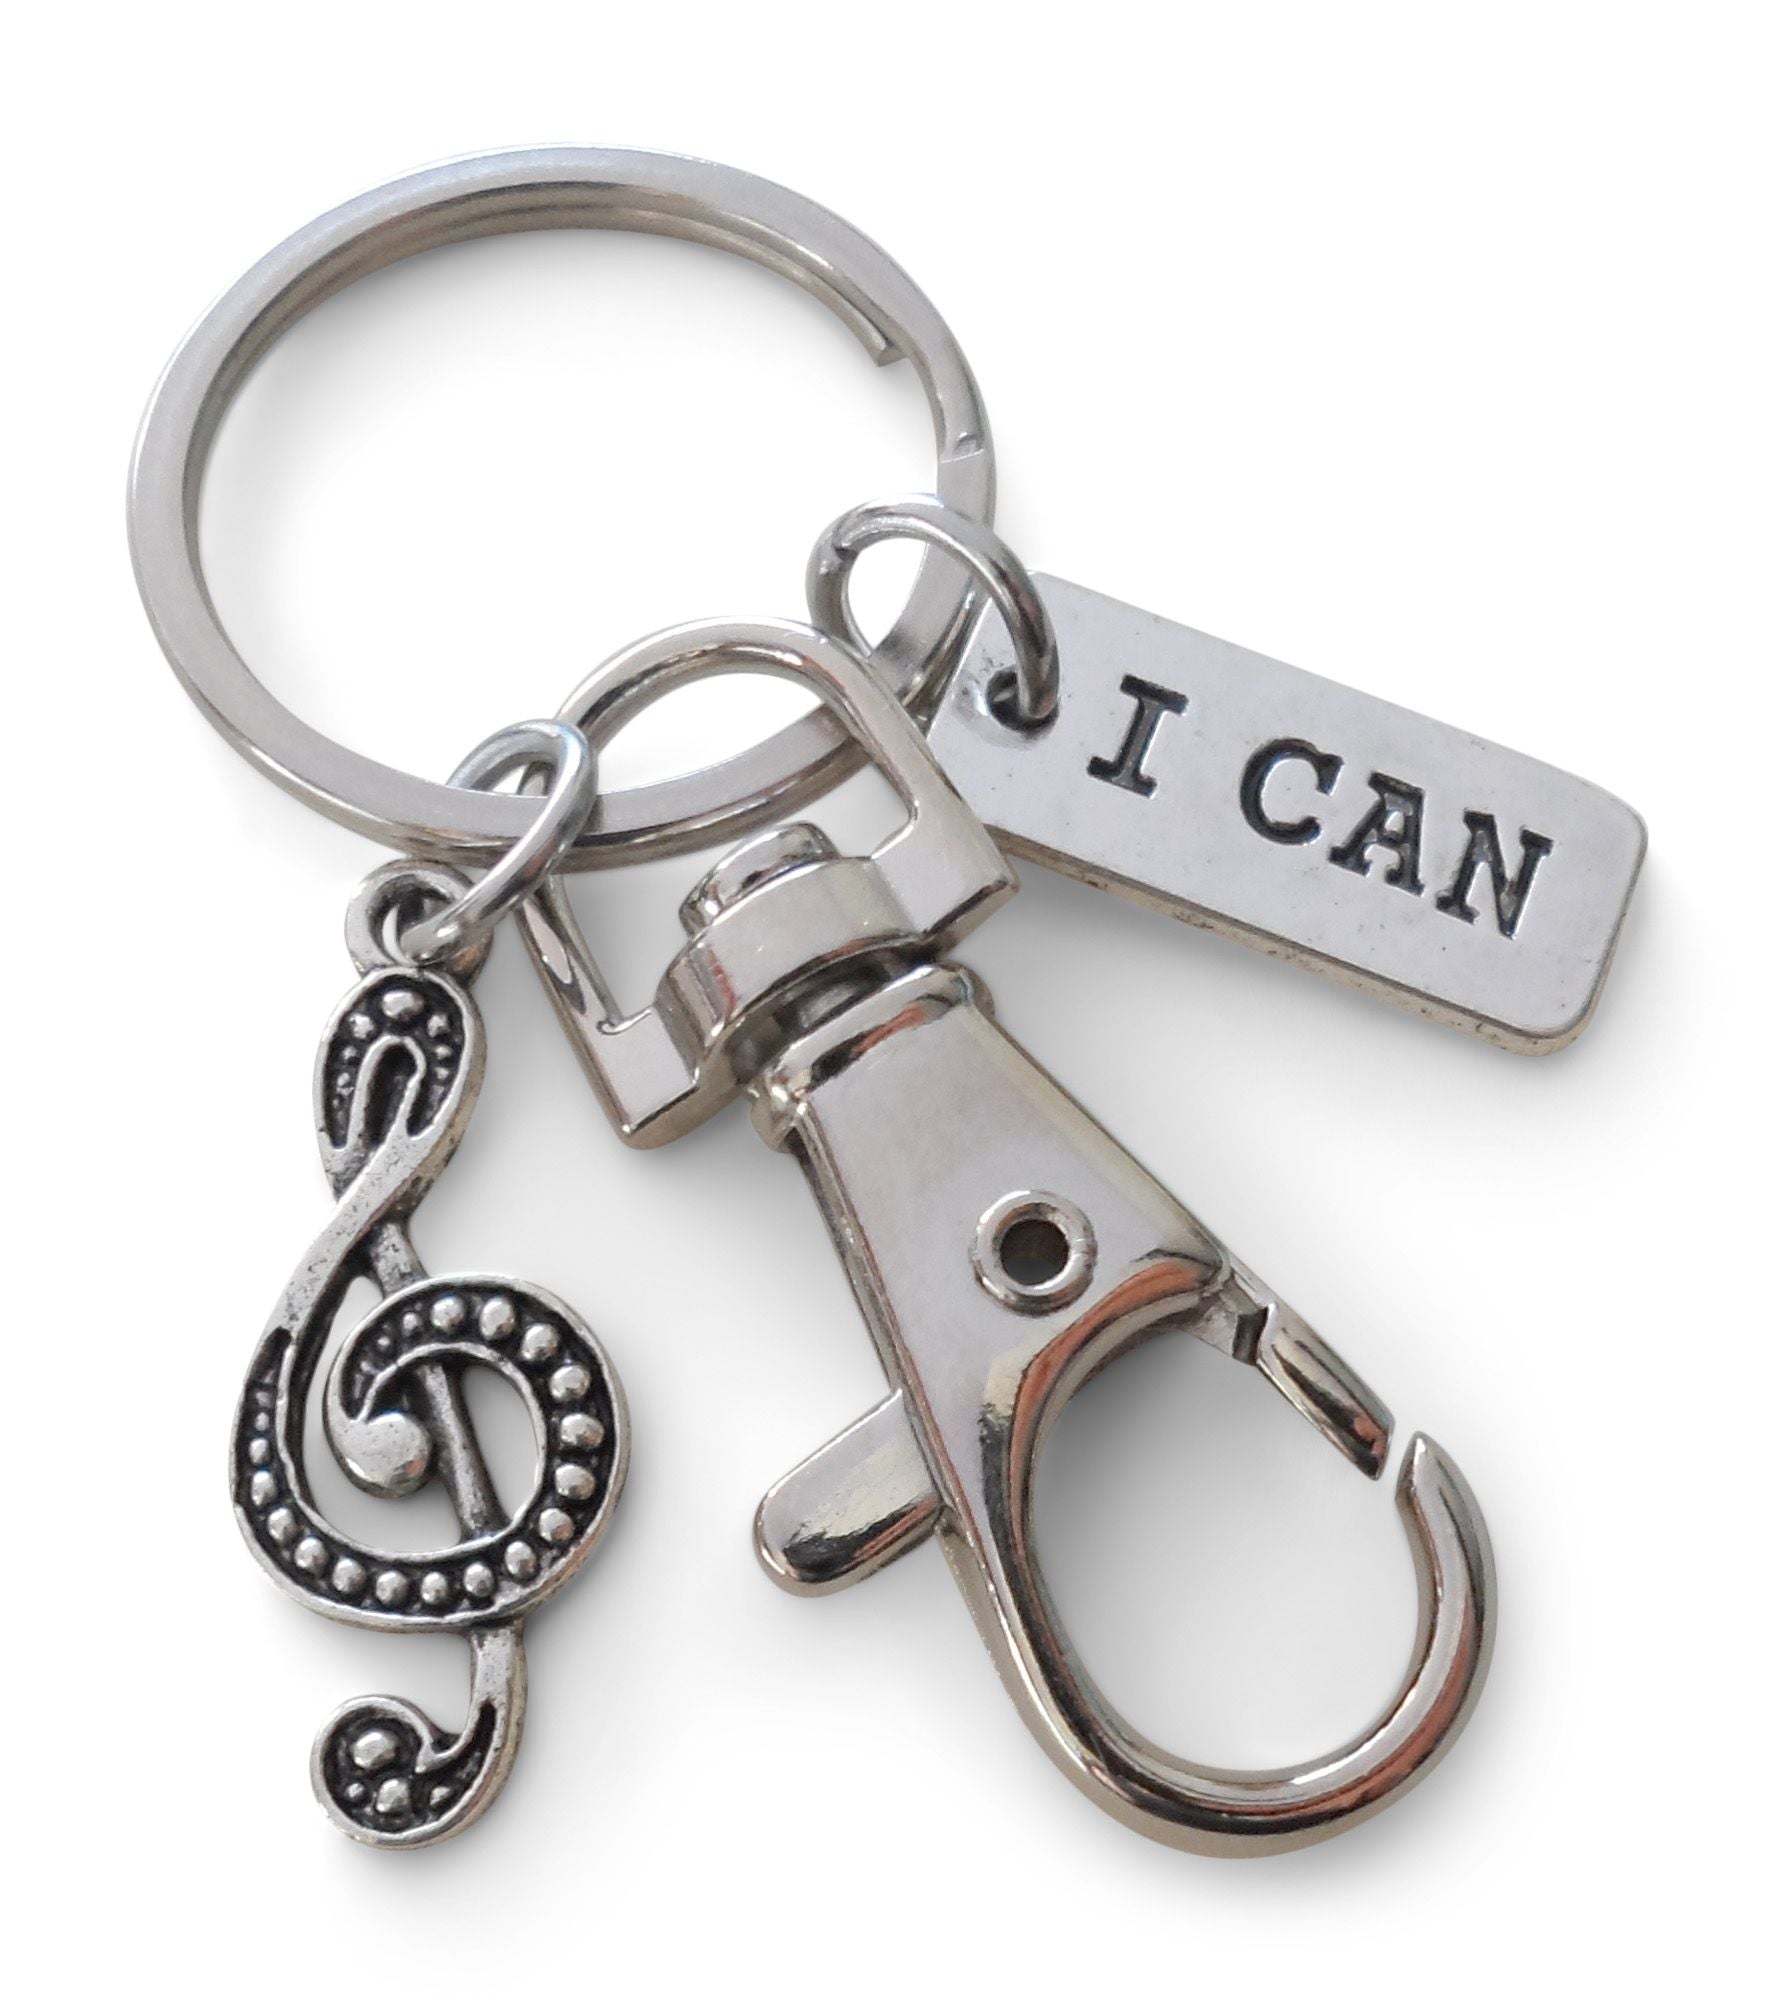 JewelryEveryday Treble Clef Charm Keychain with I Can Charm and Swivel Clasp Hook, Music Student, Teacher, or Musician Keychain